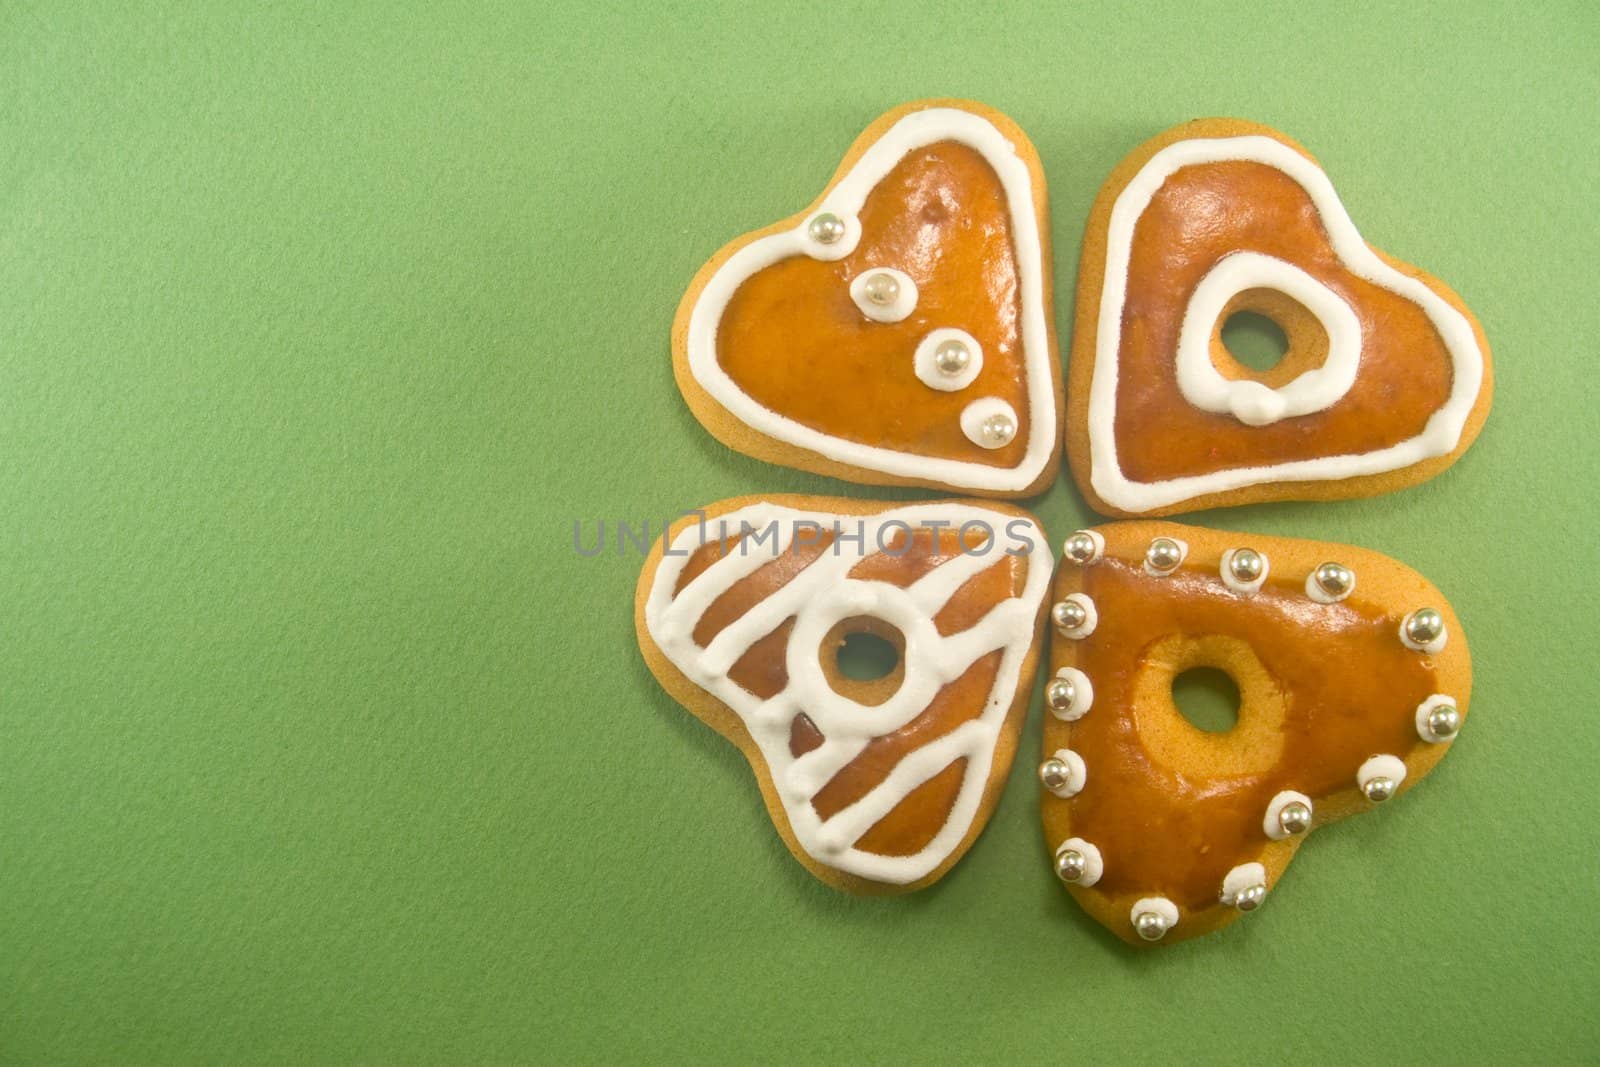 Decorated Christmas cookies in clover formation against green background ad space on left